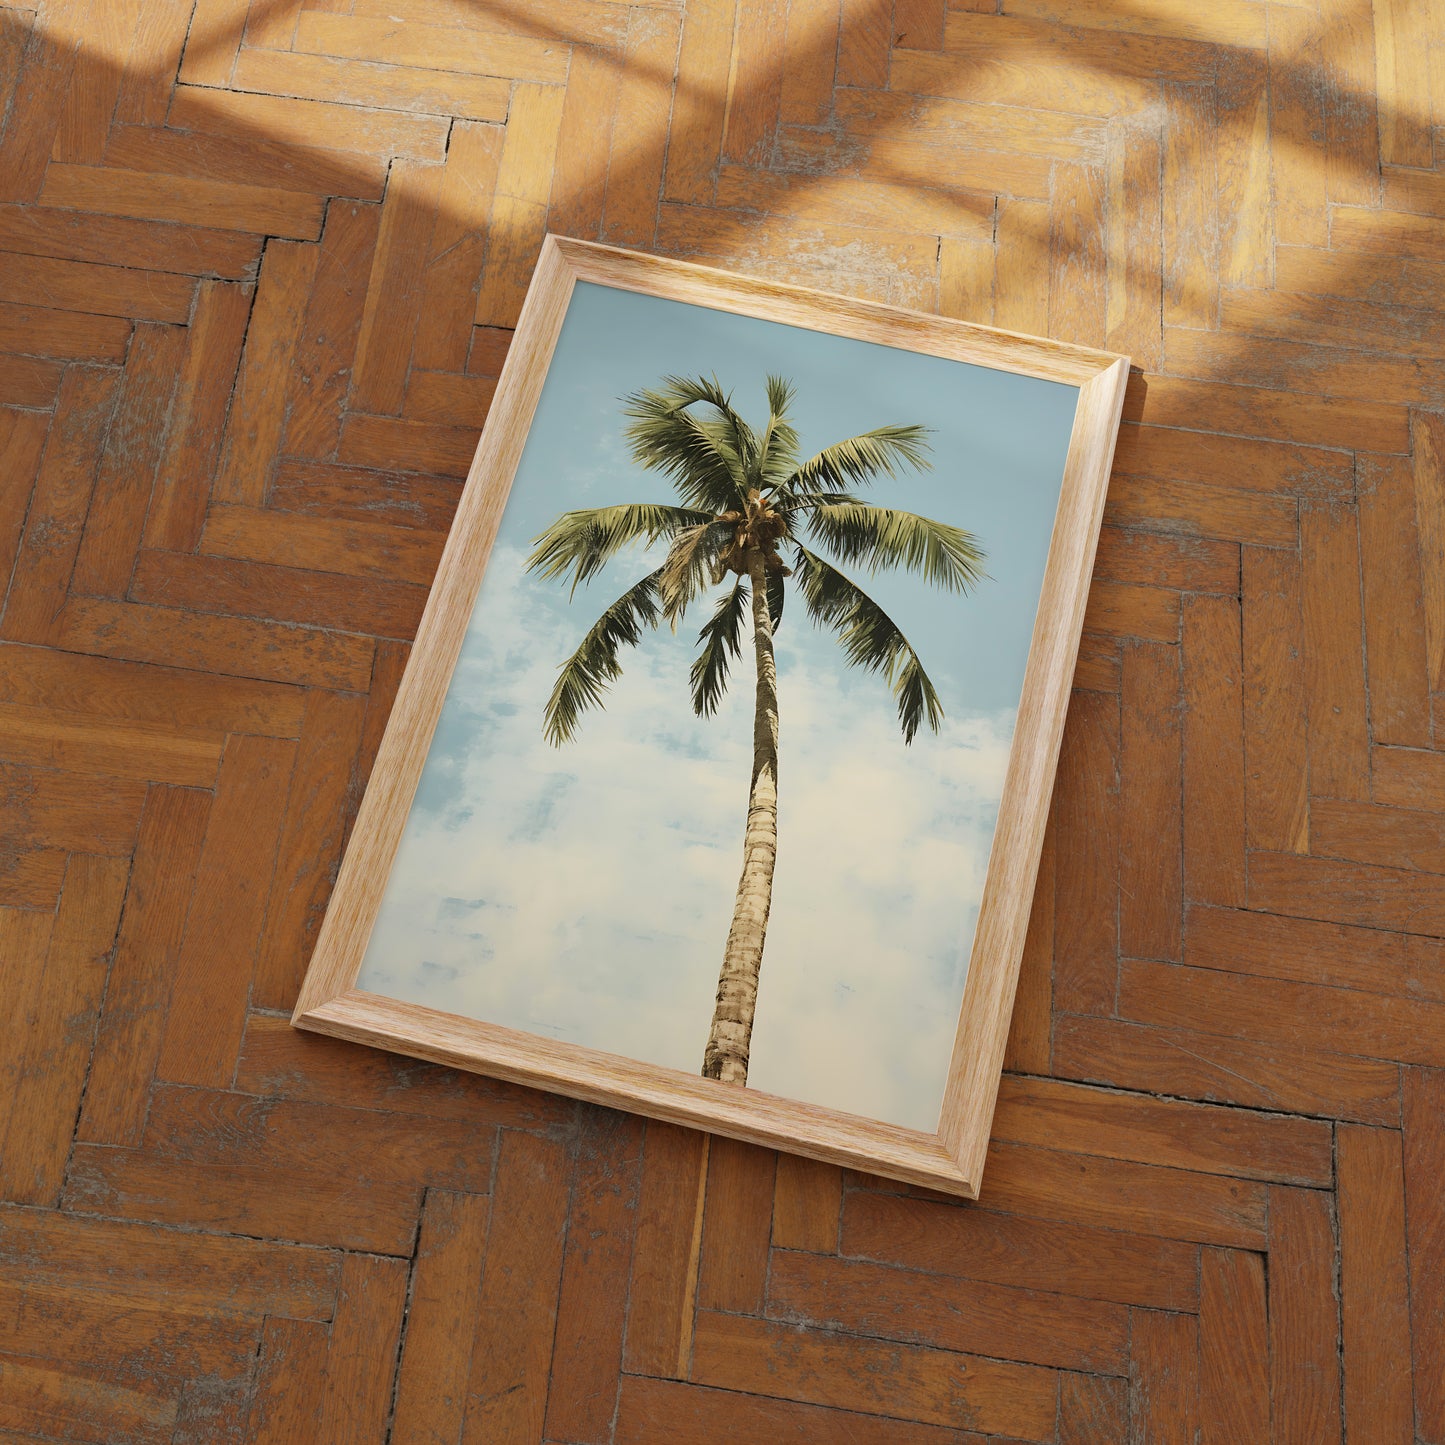 A framed picture of a palm tree on a wooden floor.